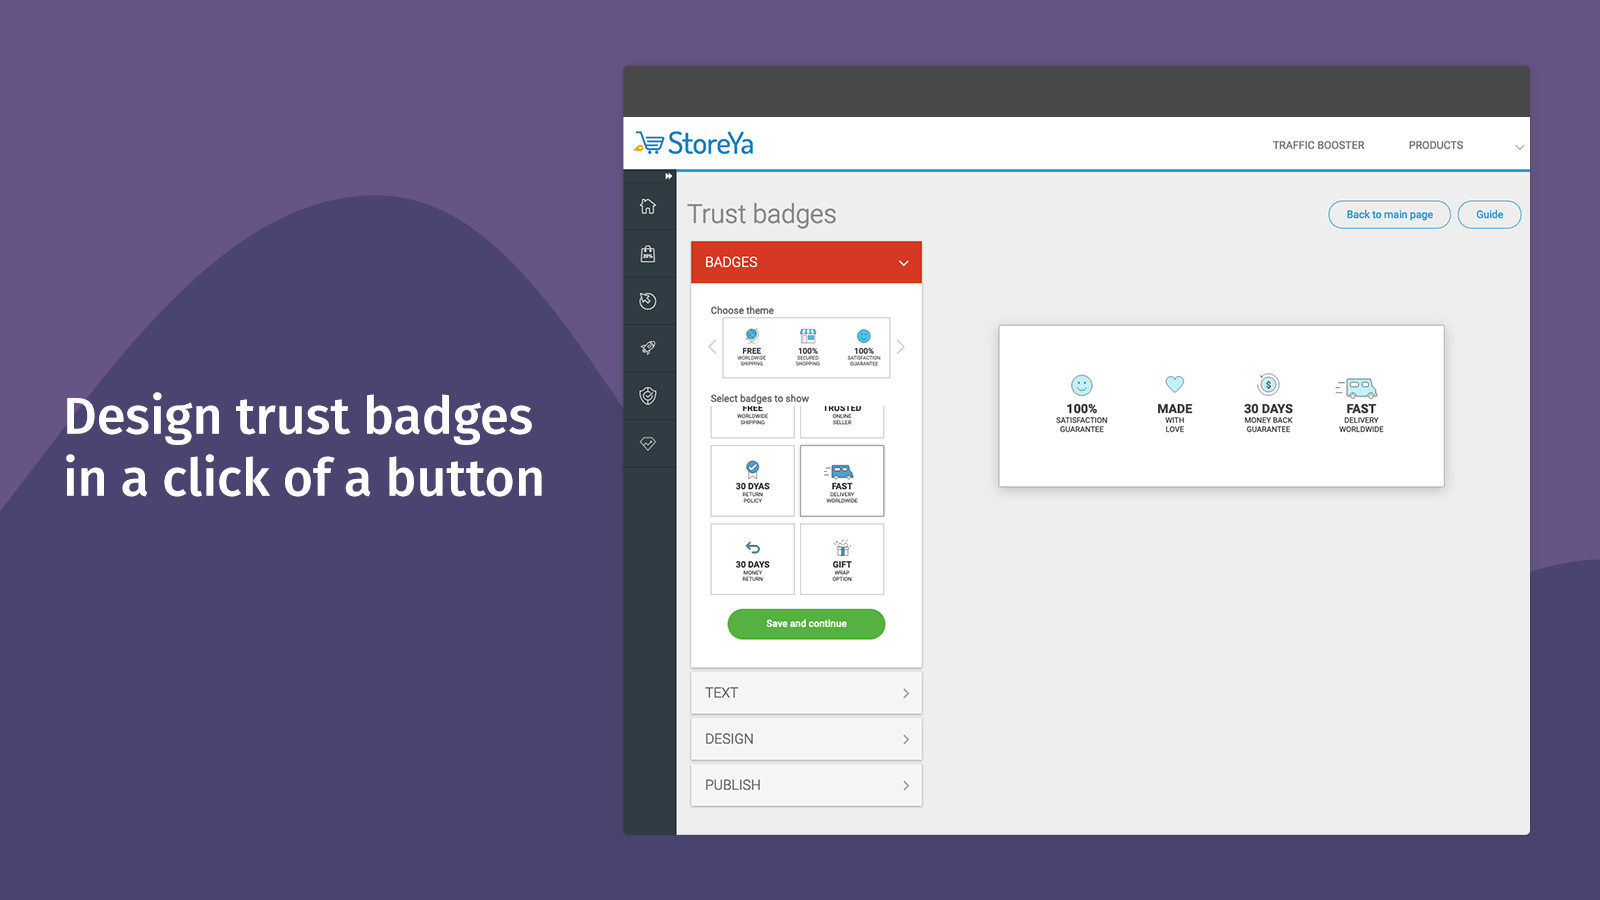 Design Trust Badges in a click of a button